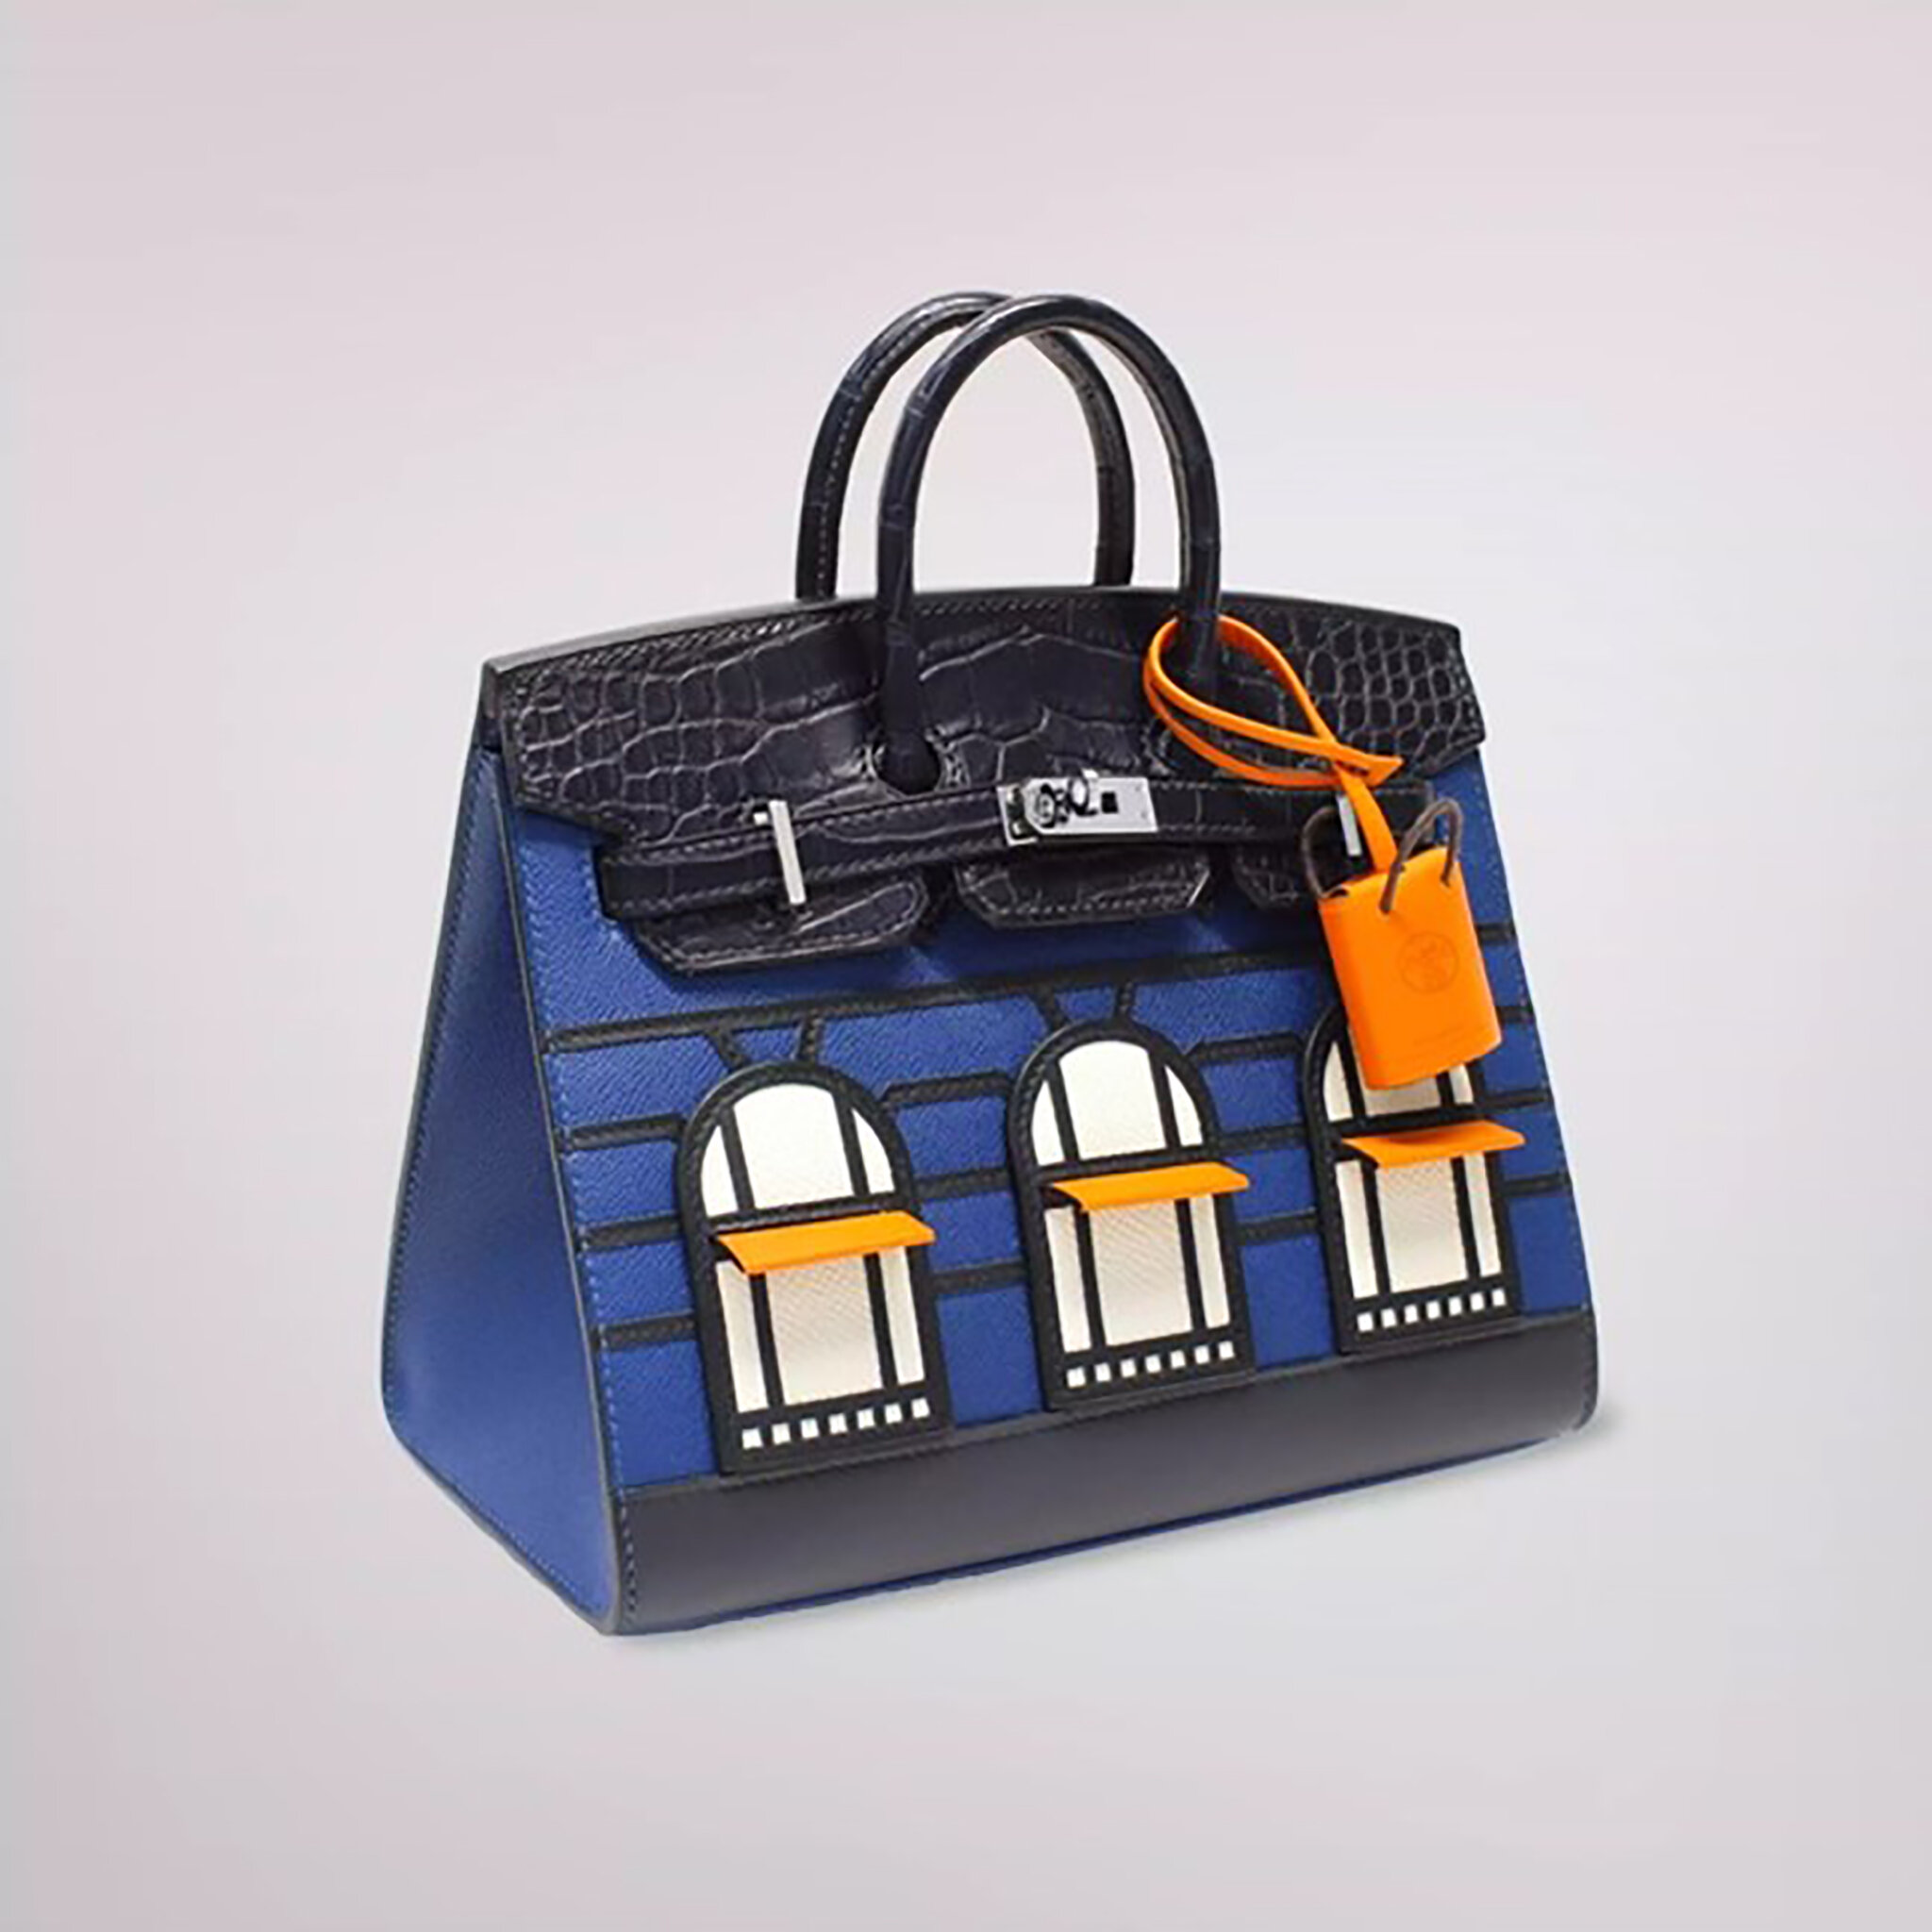 Birkin bag references in TV shows -  It's not a bag, it's a Birkin :  r/popculturechat